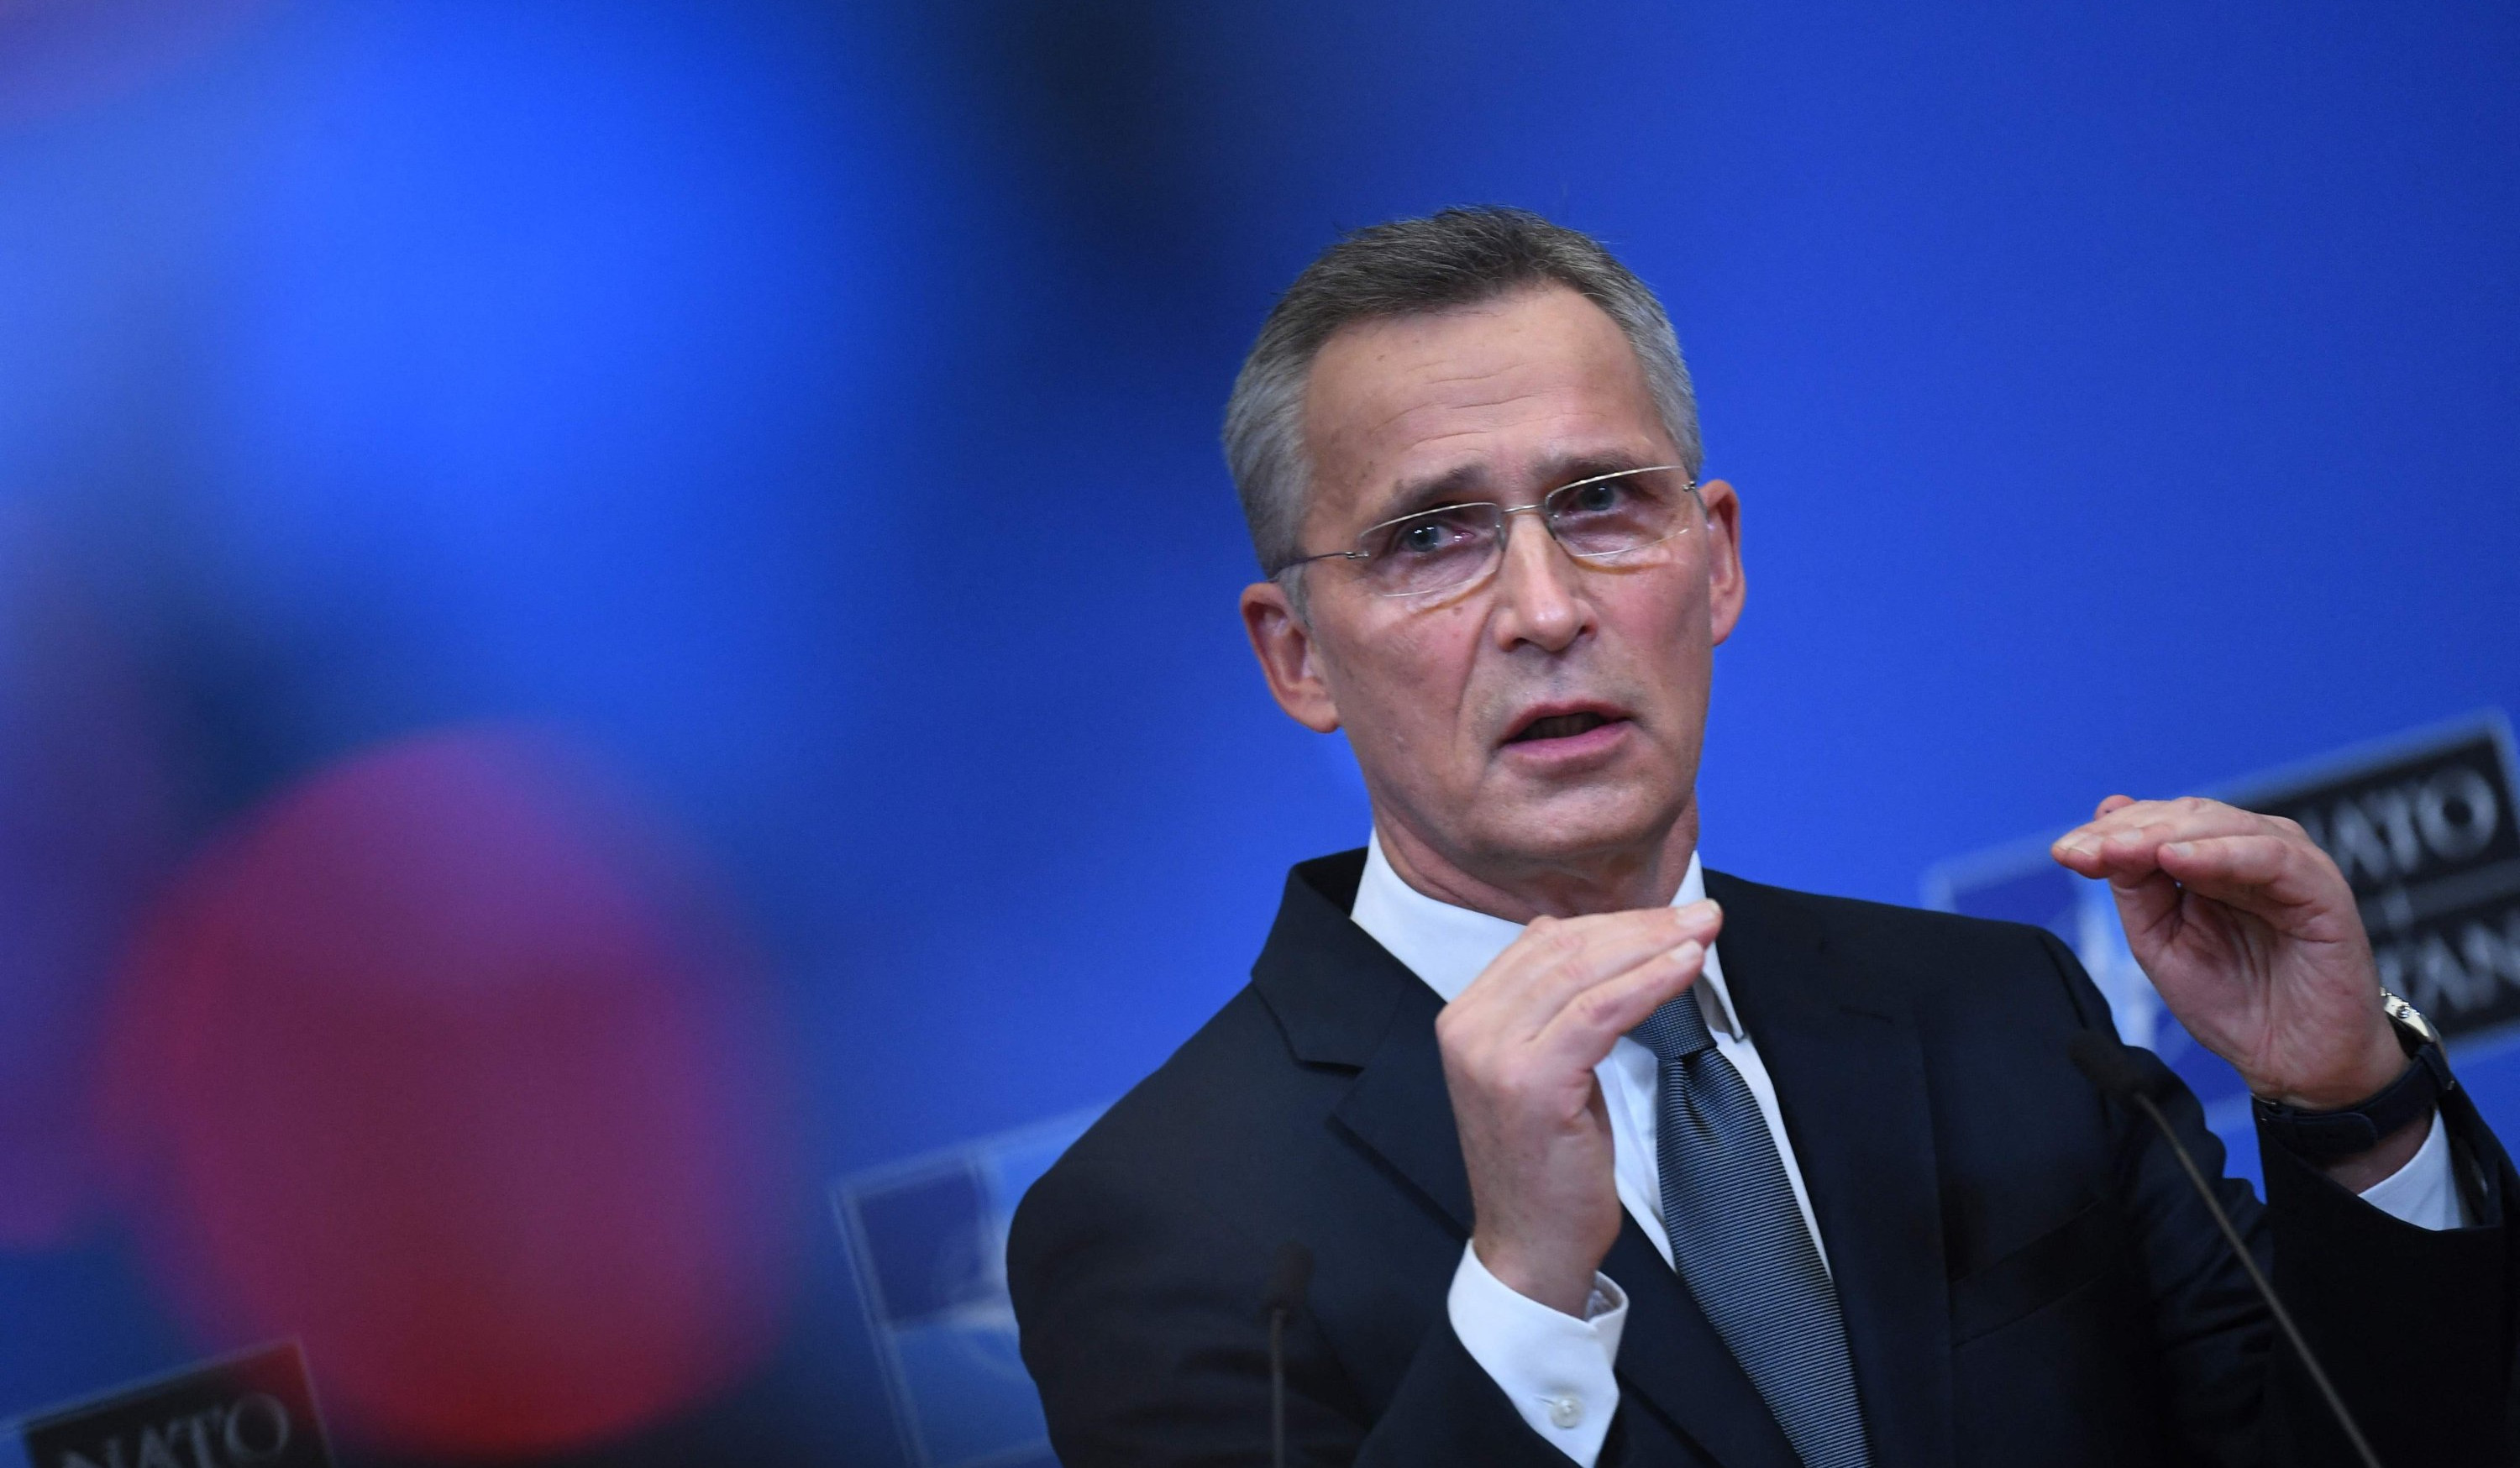 NATO expects Russia-Ukraine conflict to further escalate as Victory Day nears